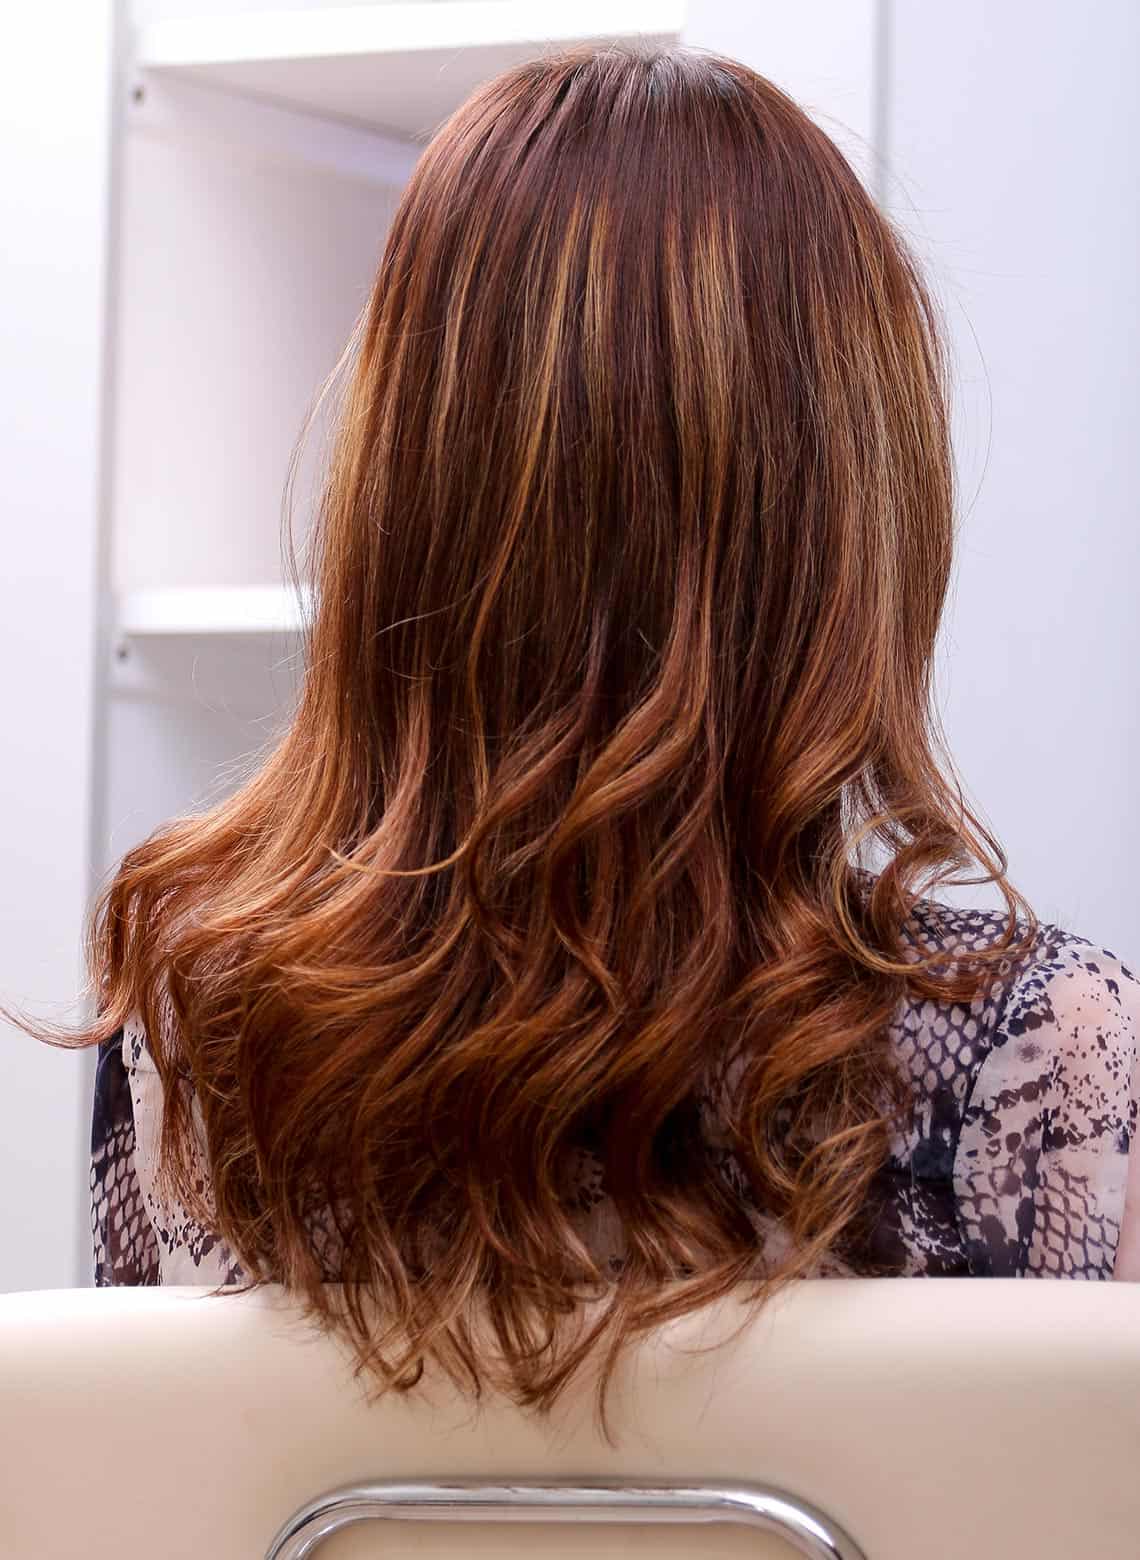 back of person's head showing long brunette hair